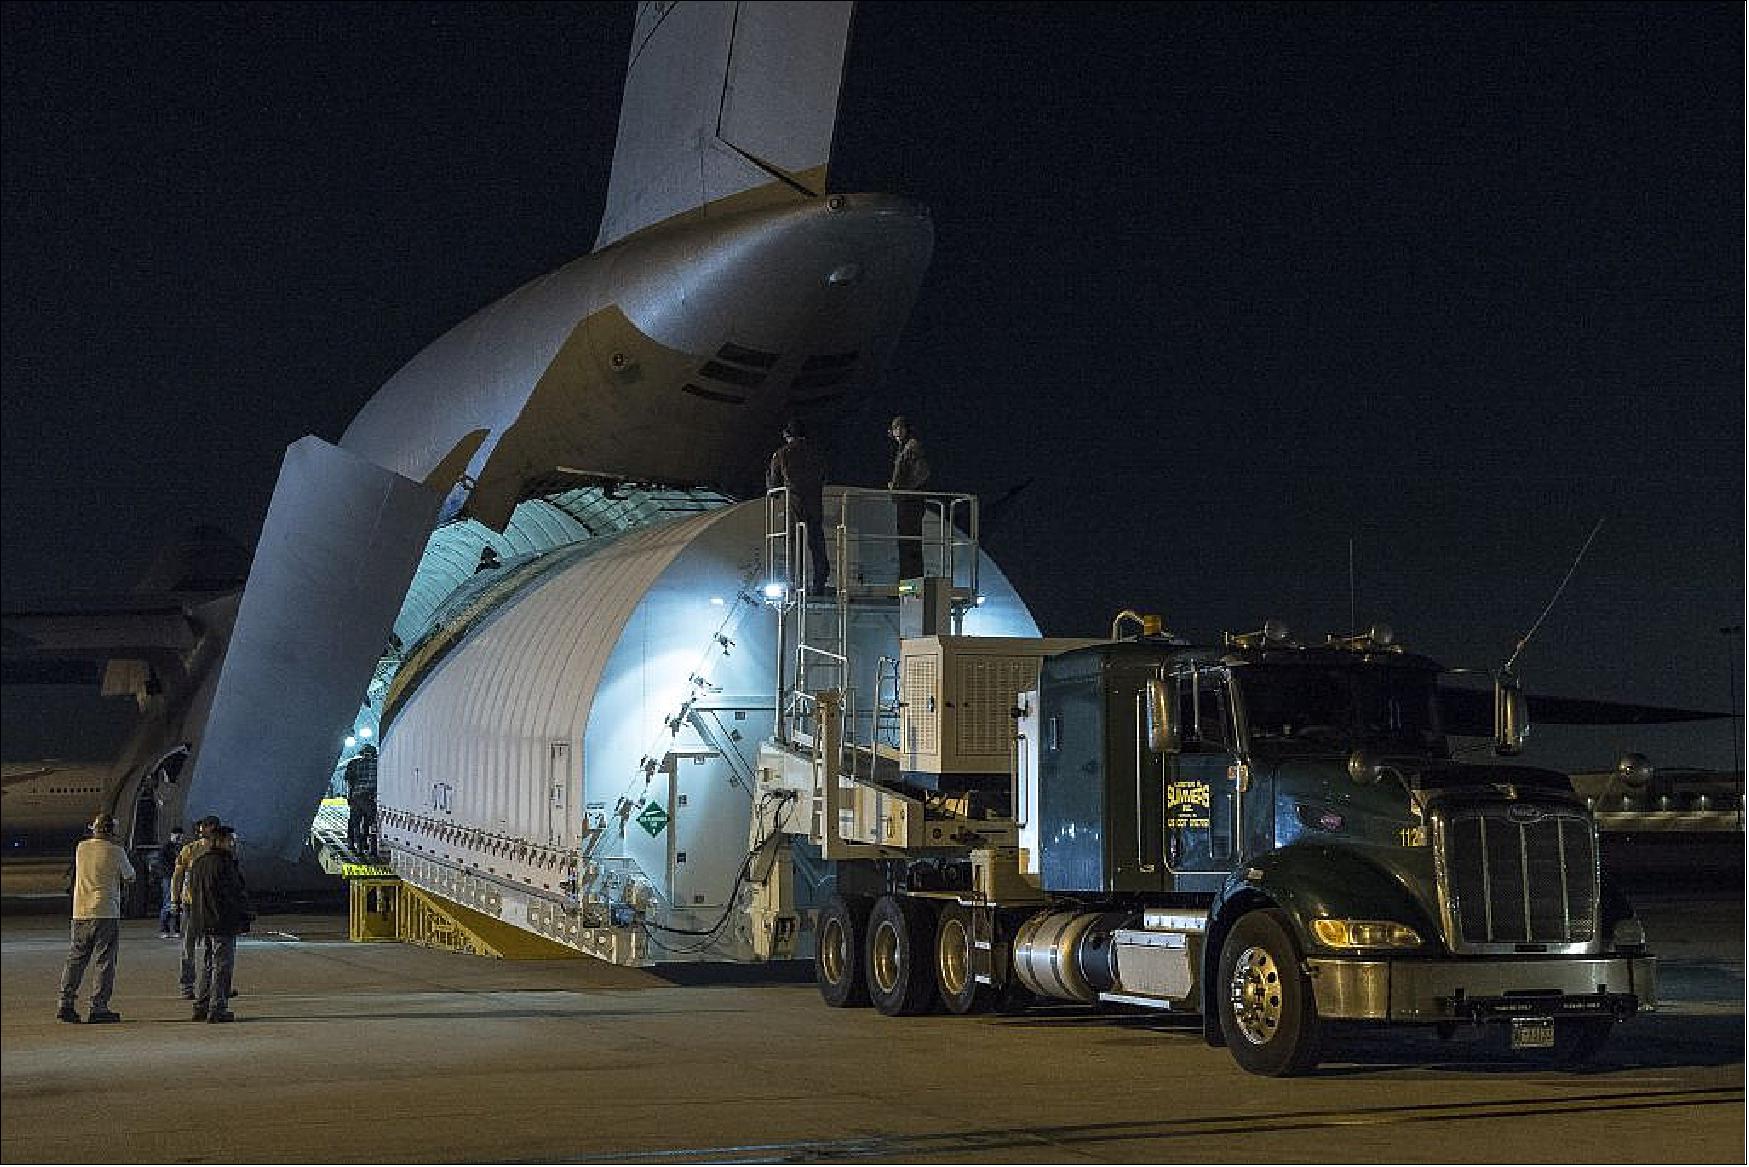 Figure 50: Photo of the STTARS (Space Telescope for Air, Road, and Sea) container with OTIS inside during unloading from the C-5 Charlie military aircraft at LAX (Los Angeles International Airport) on 2 Feb. 2018 (image credit: NASA, Chris Gunn)